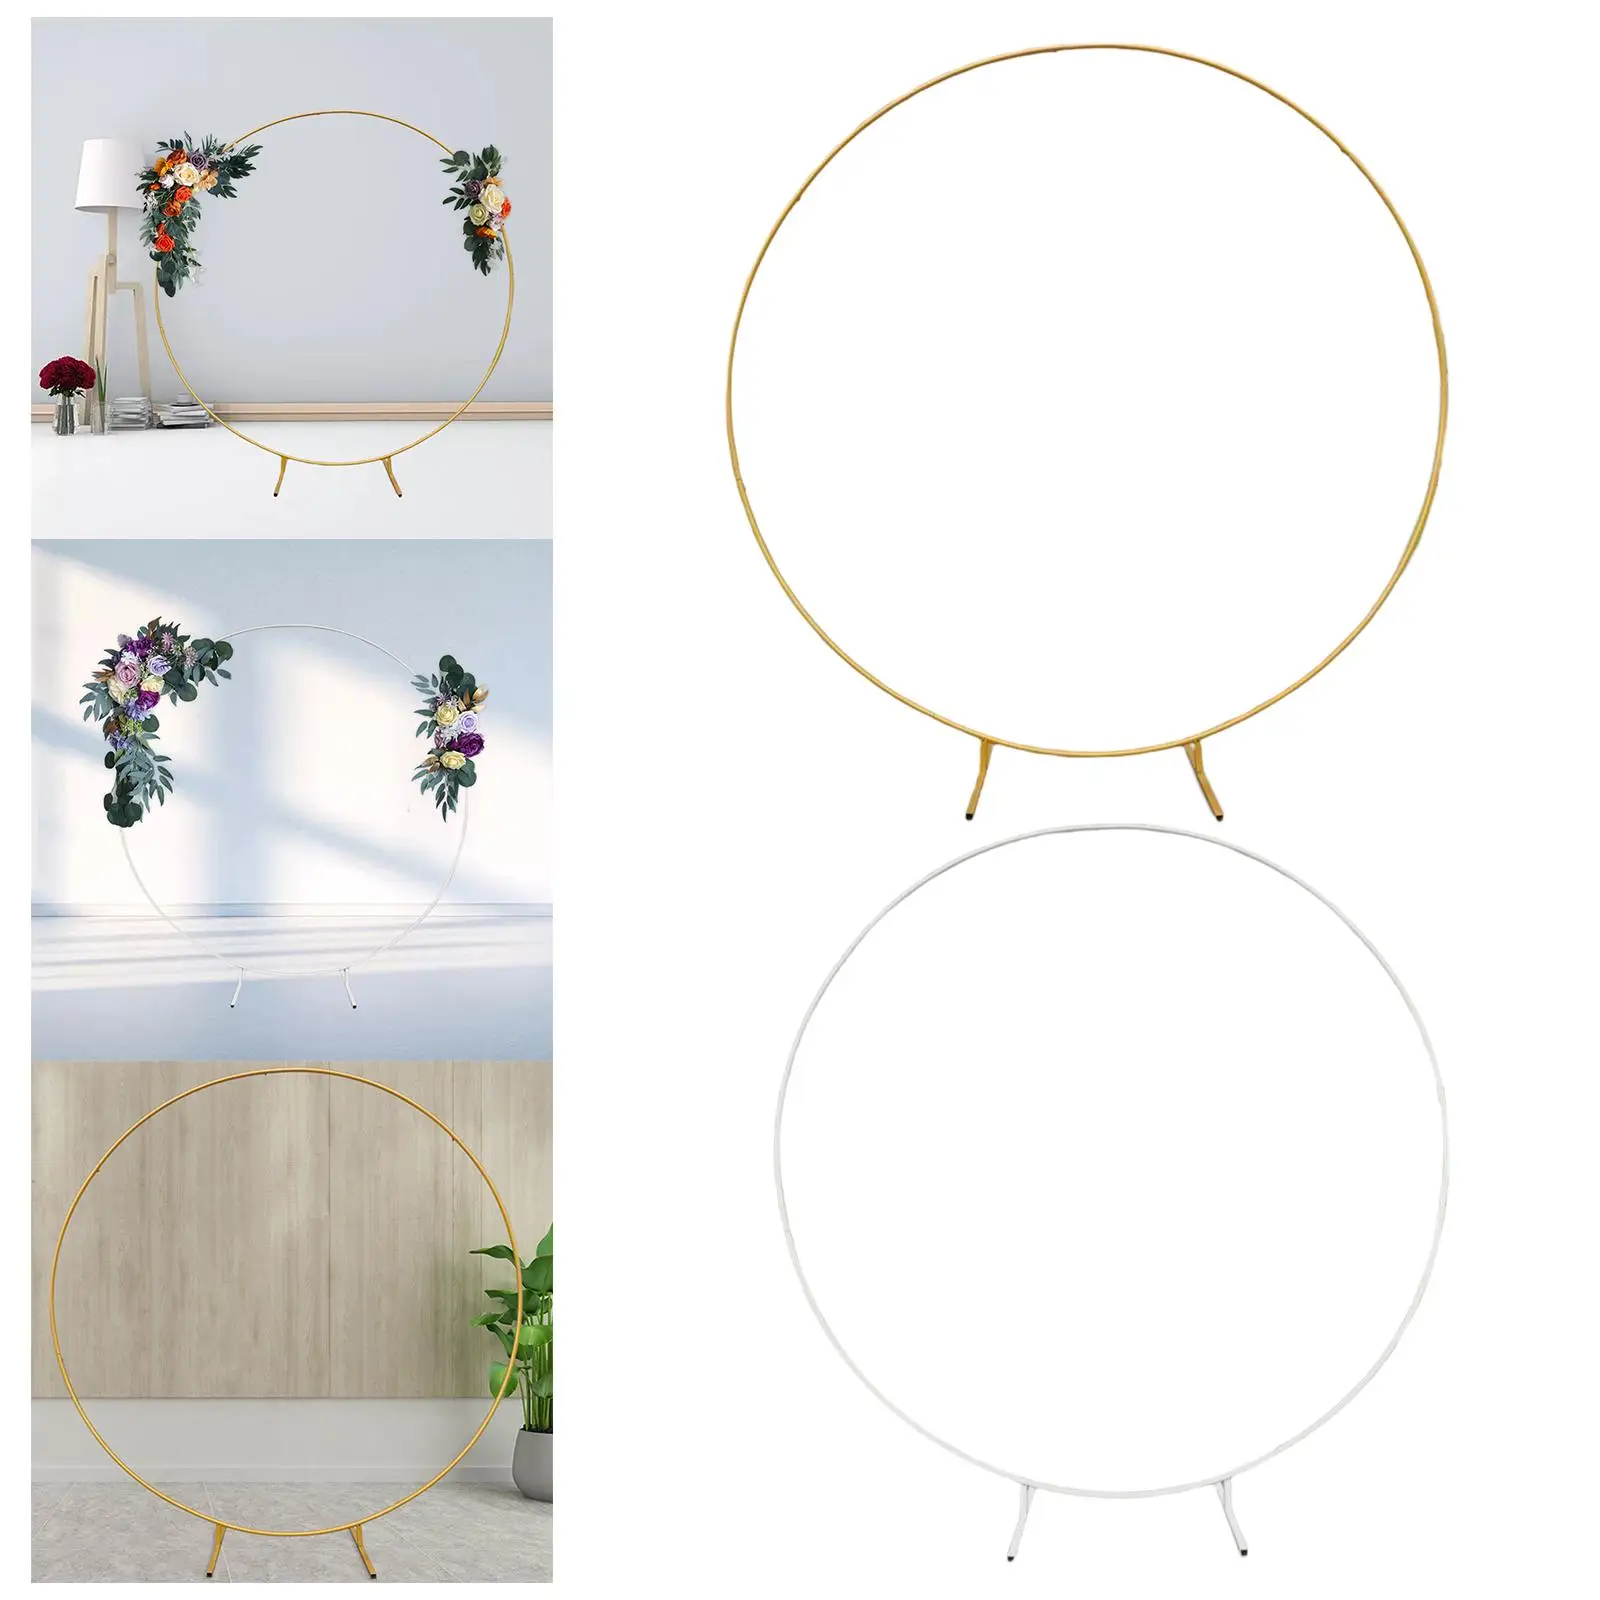 Wedding Arch Balloon Arch Kit Stand 70.87inch Circle Backdrop Stand Frame Heavy Duty for Graduation Party Lawn Birthday Decor